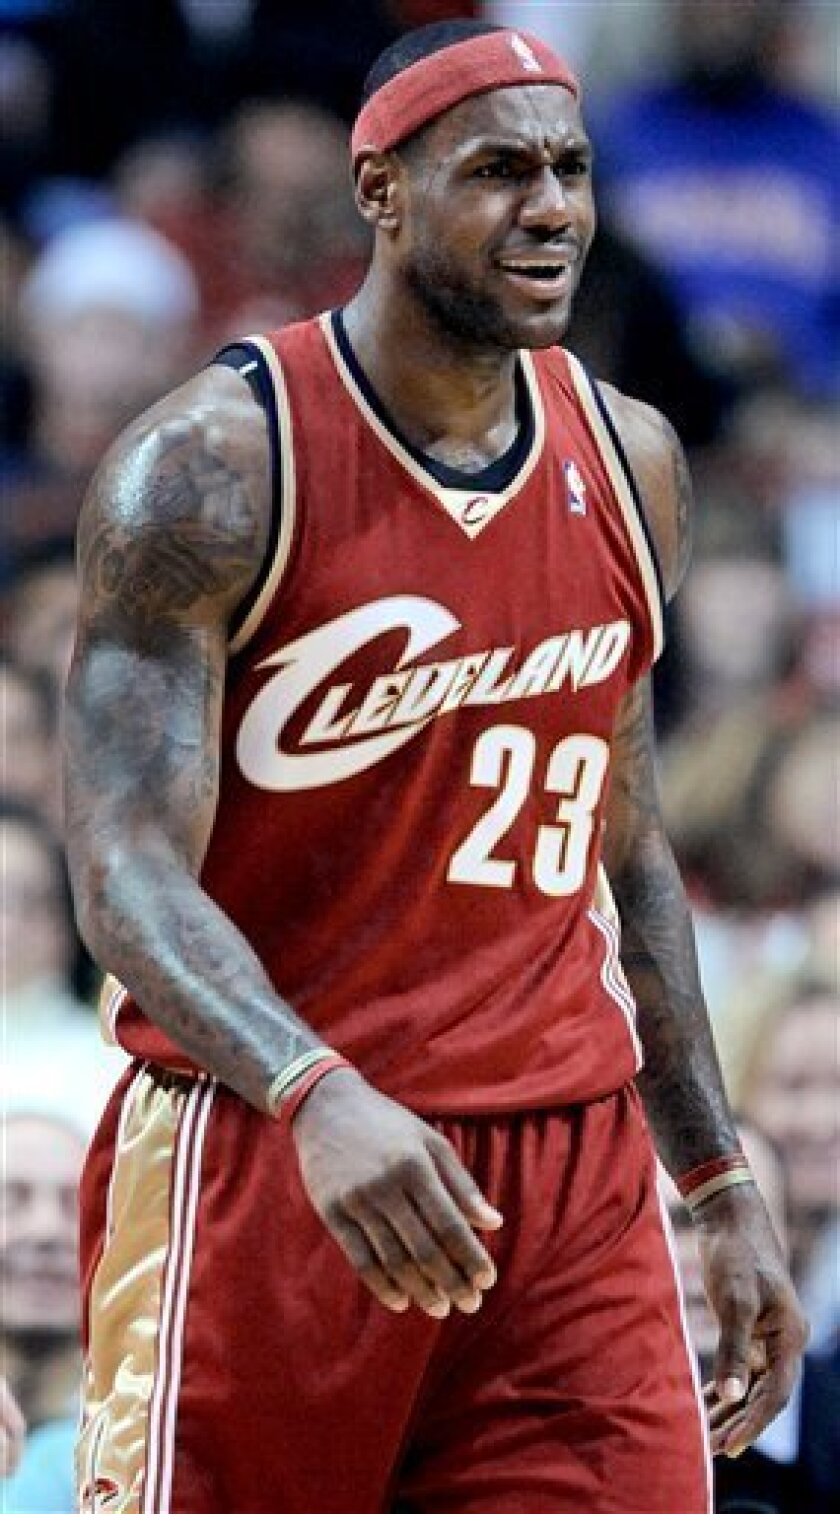 Cleveland Cavaliers' LeBron James' argues with a referee in the first quarter during a NBA basketball game in Chicago, Saturday, Nov. 8, 2008. (AP Photo/Paul Beaty)